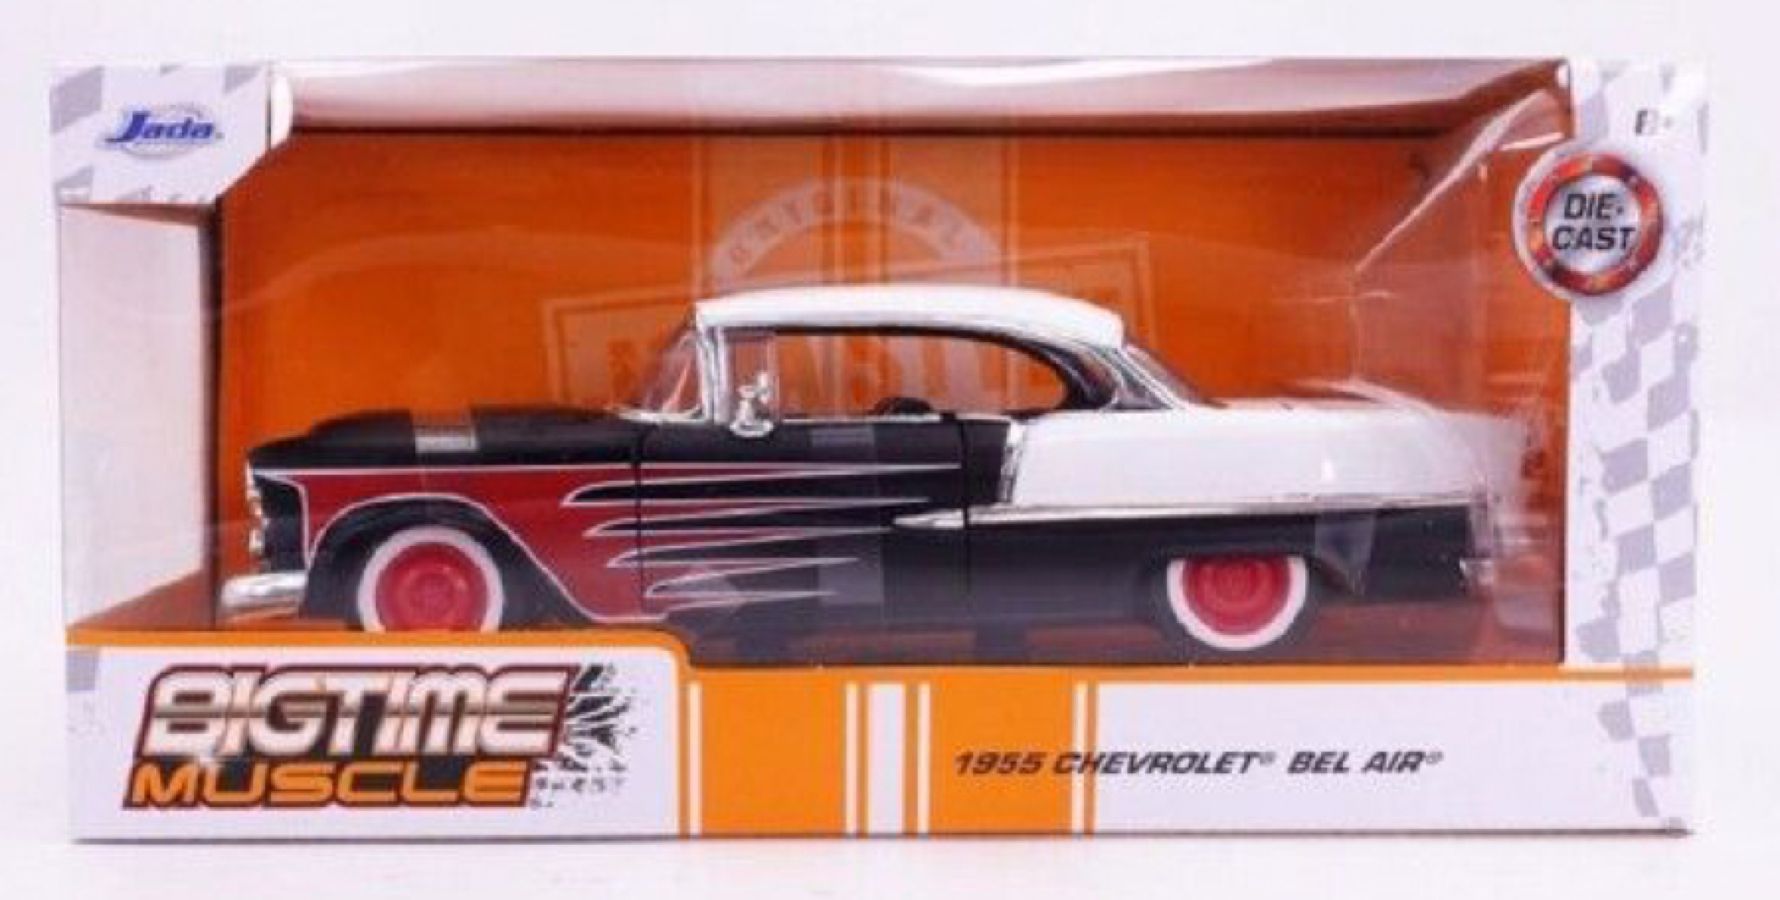 Big Time Muscle - 1955 Chevrolet Bel Air 1:24 Scale